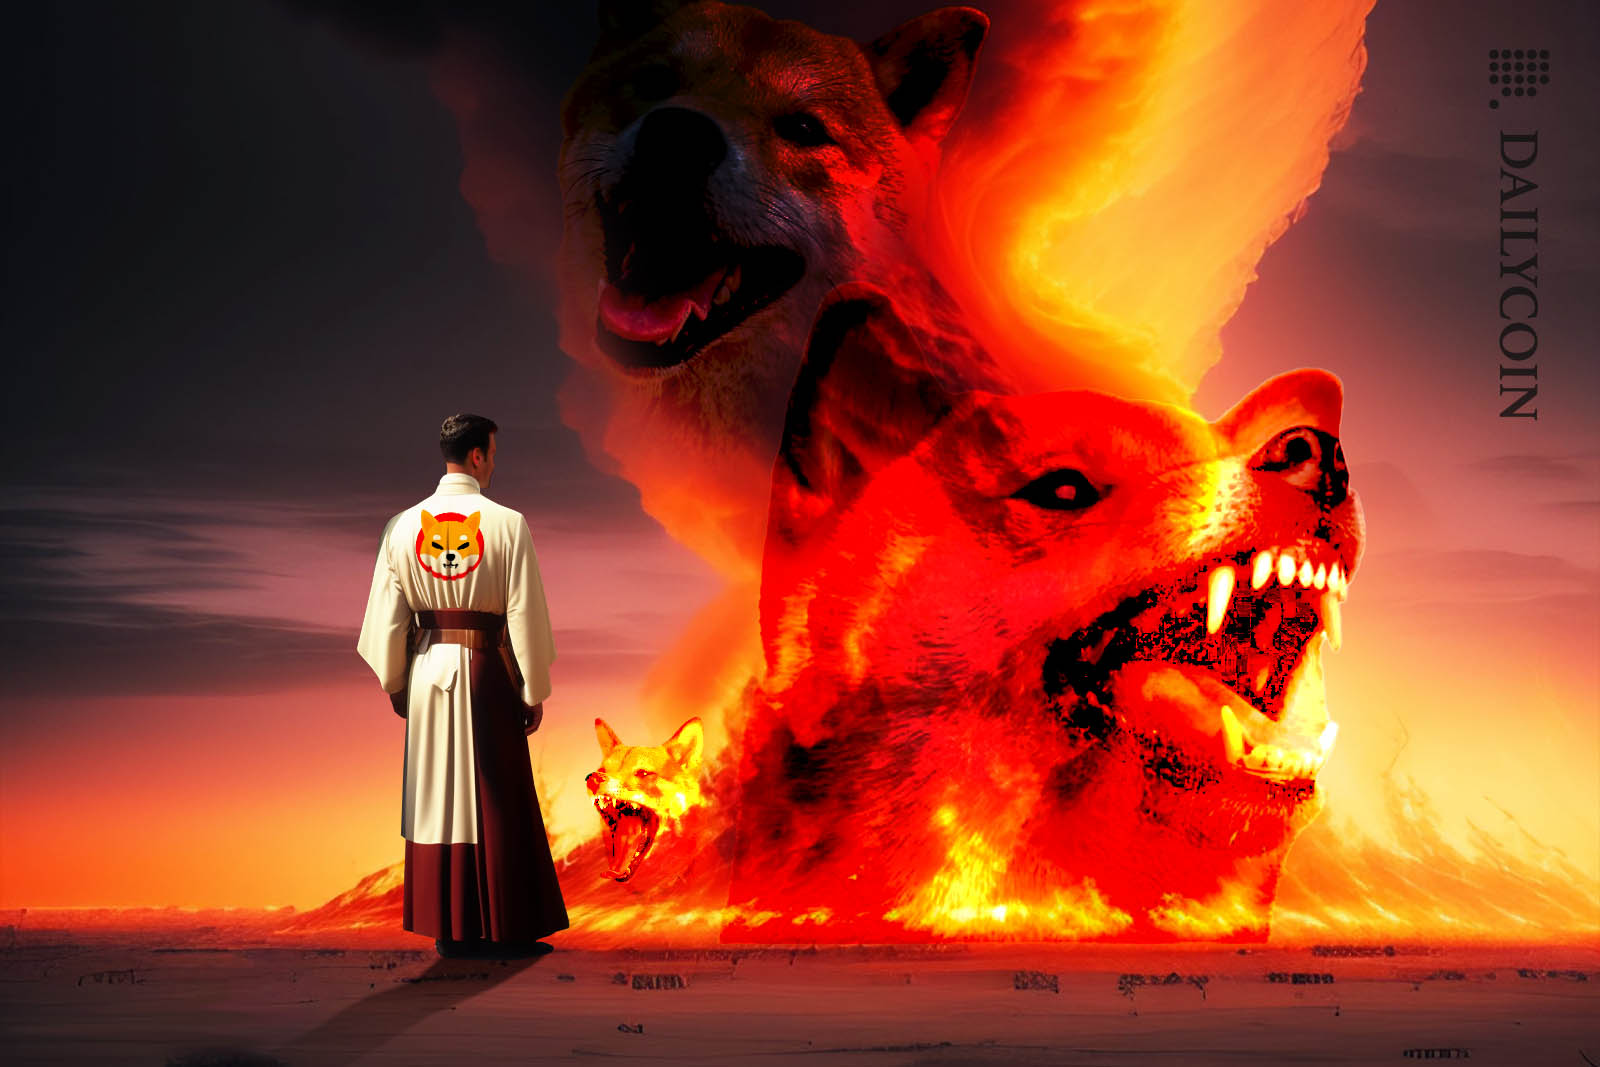 Shiba Inu employee overseeing a large fire resembeling of ghostly Shiba Inu faces.